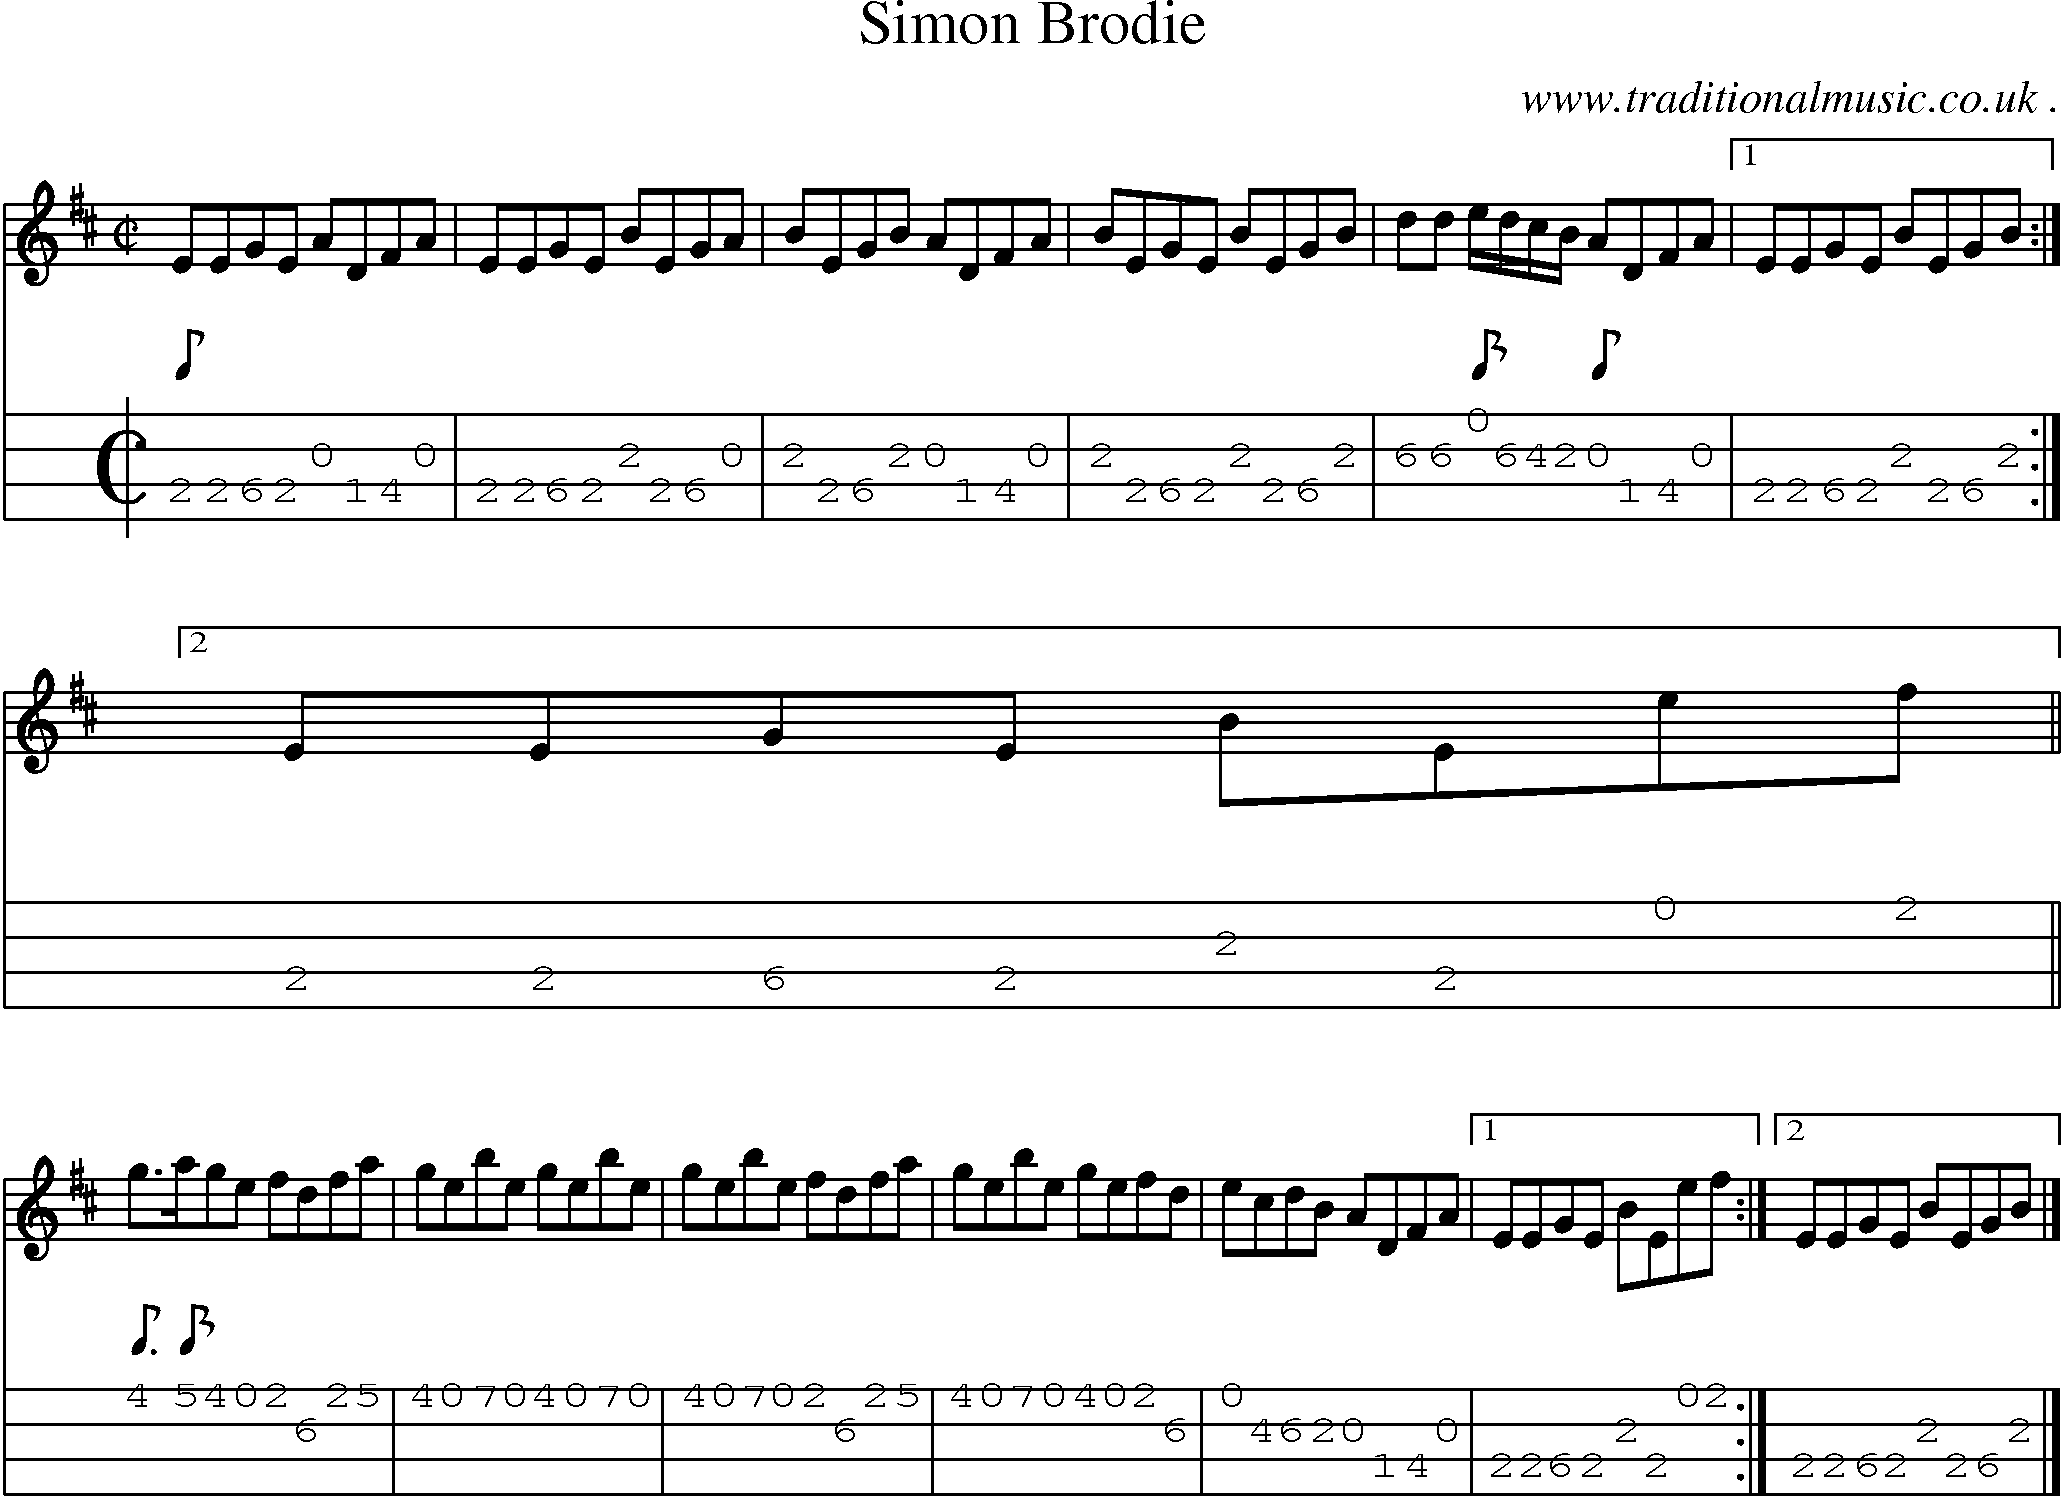 Sheet-music  score, Chords and Mandolin Tabs for Simon Brodie